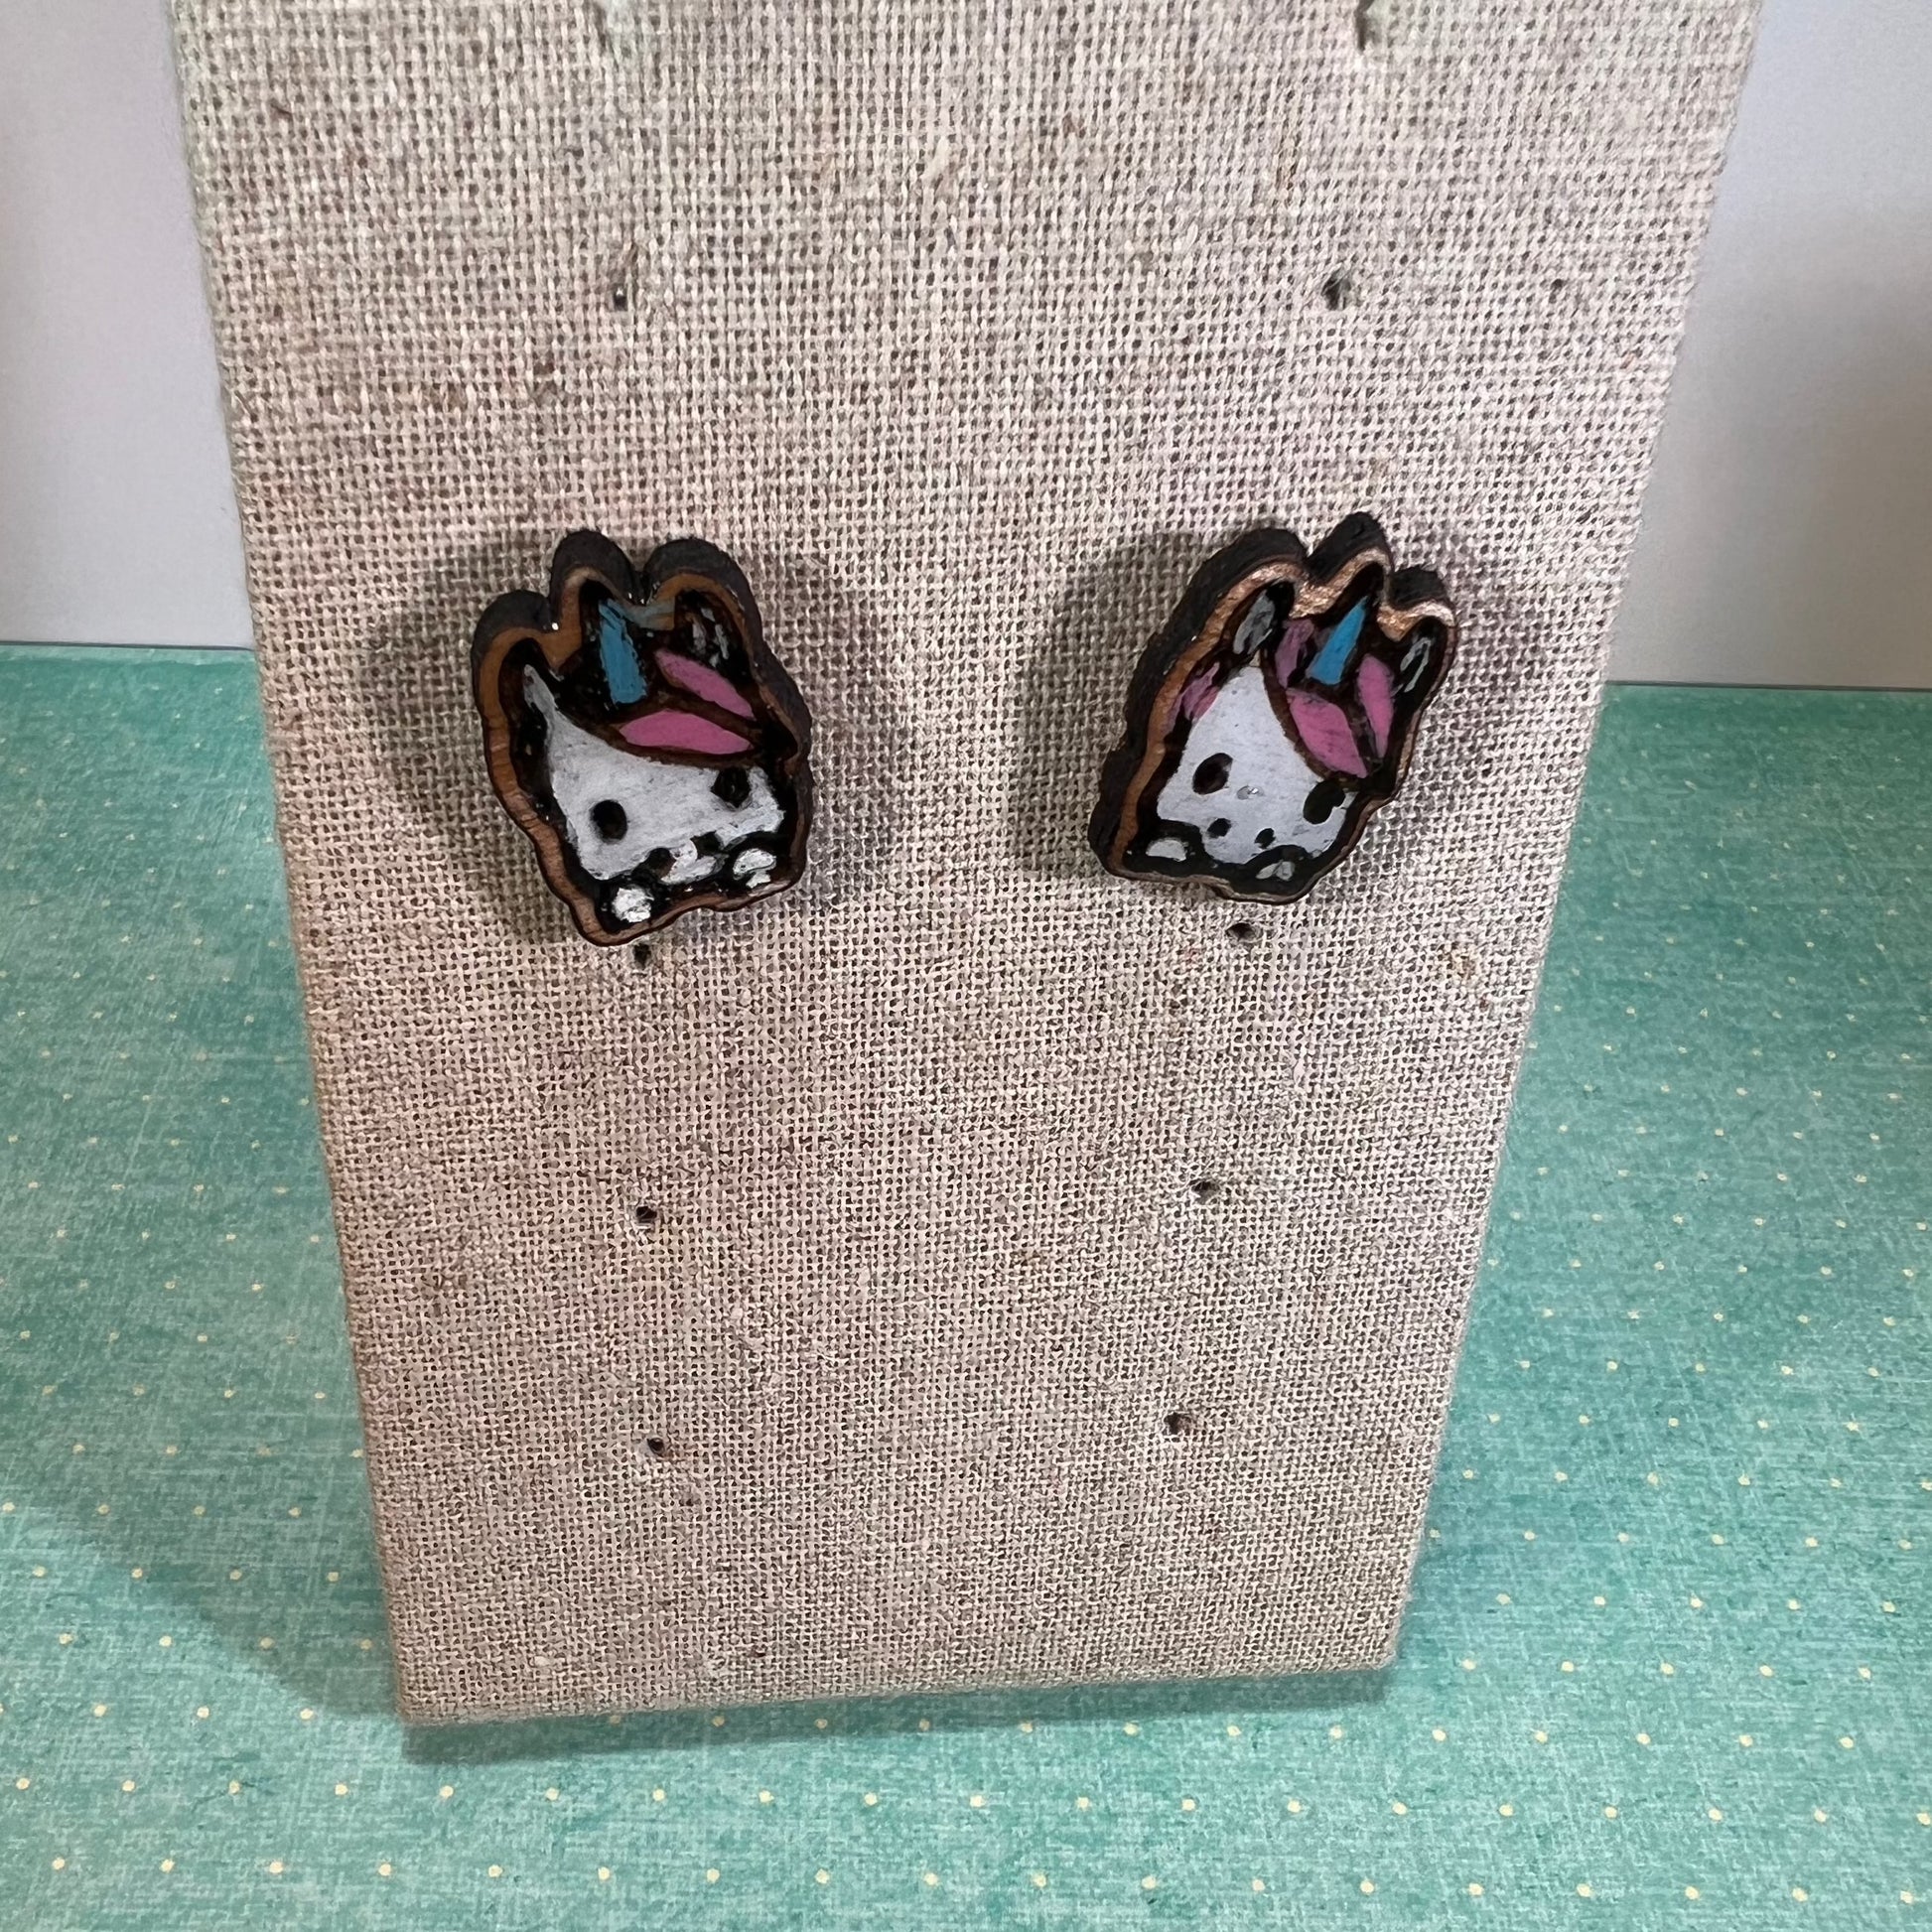 Pair of laser cut wood earrings, white unicorn faces with a pink mane and blue unicorn horns.